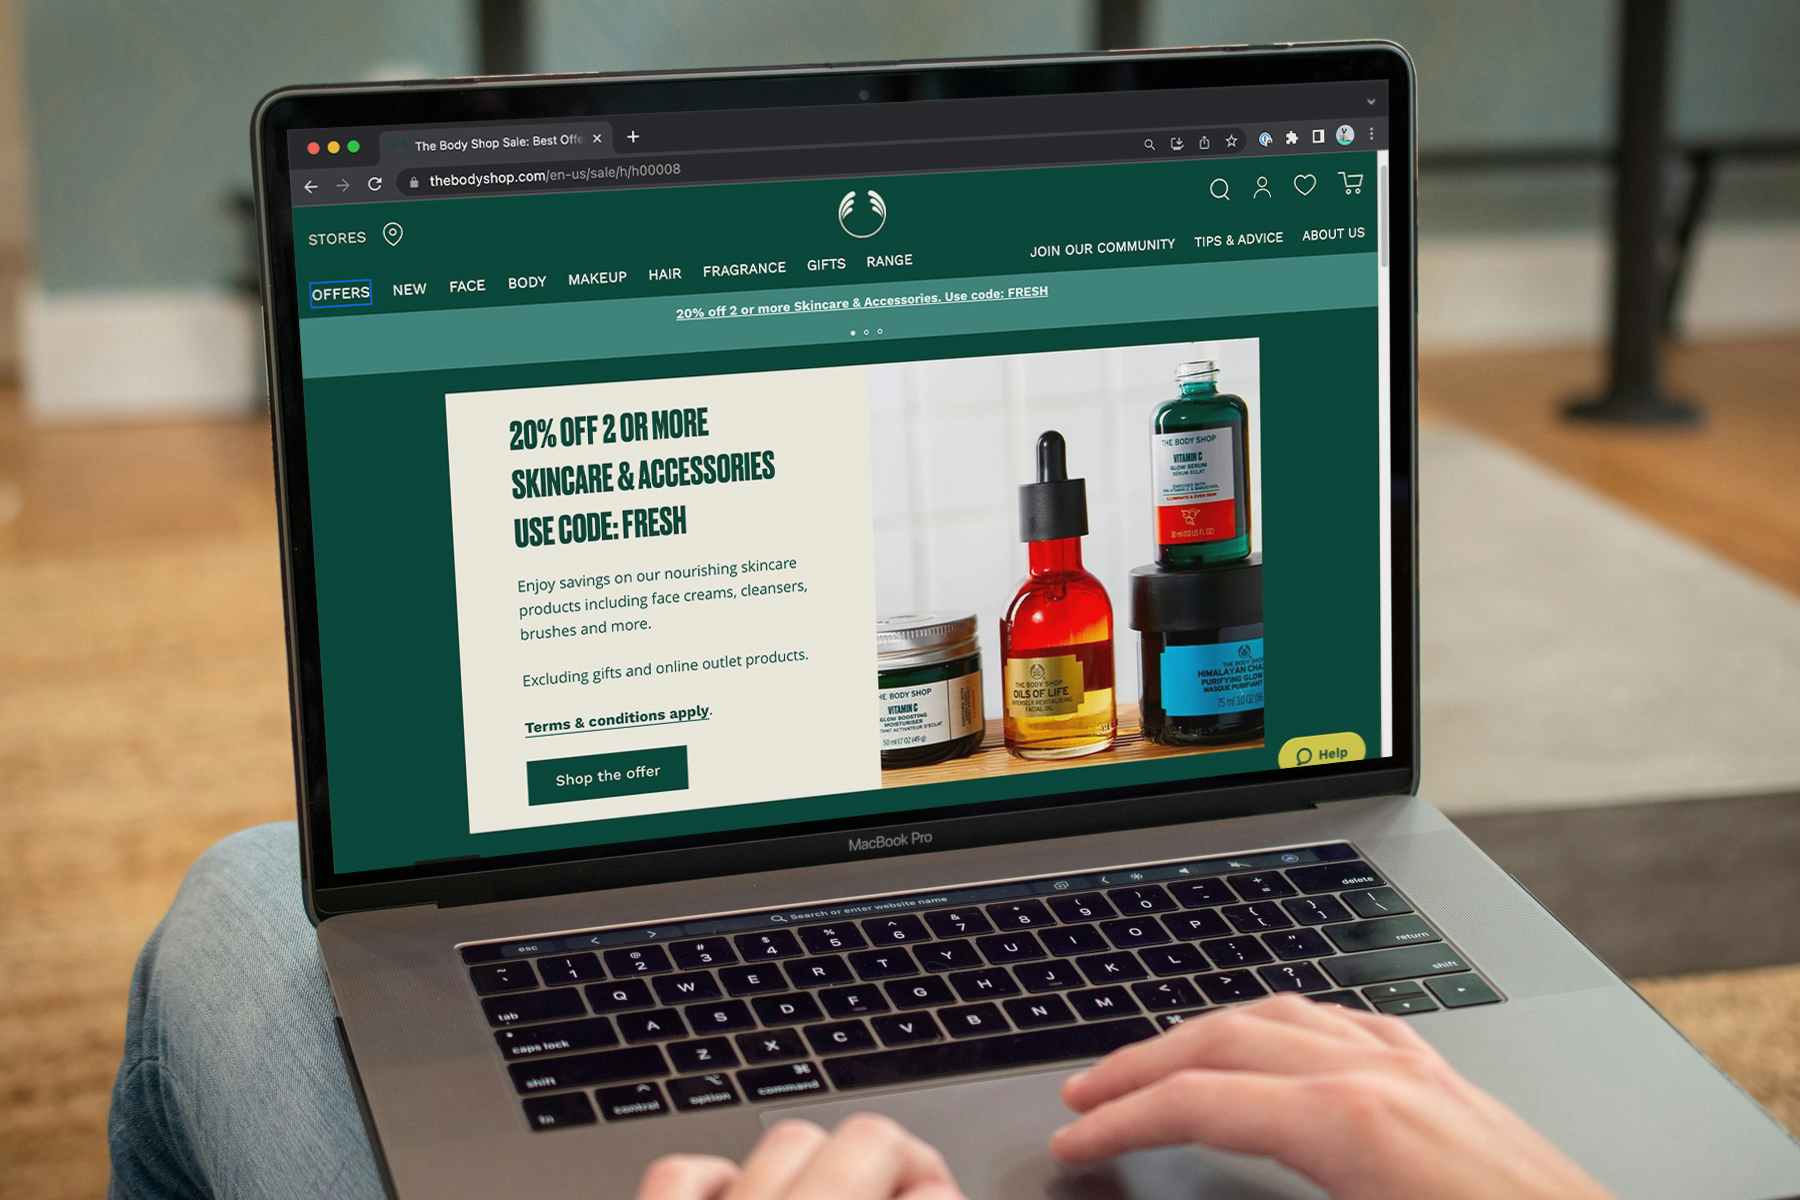 Someone looking at the offers on The Body Shop's website